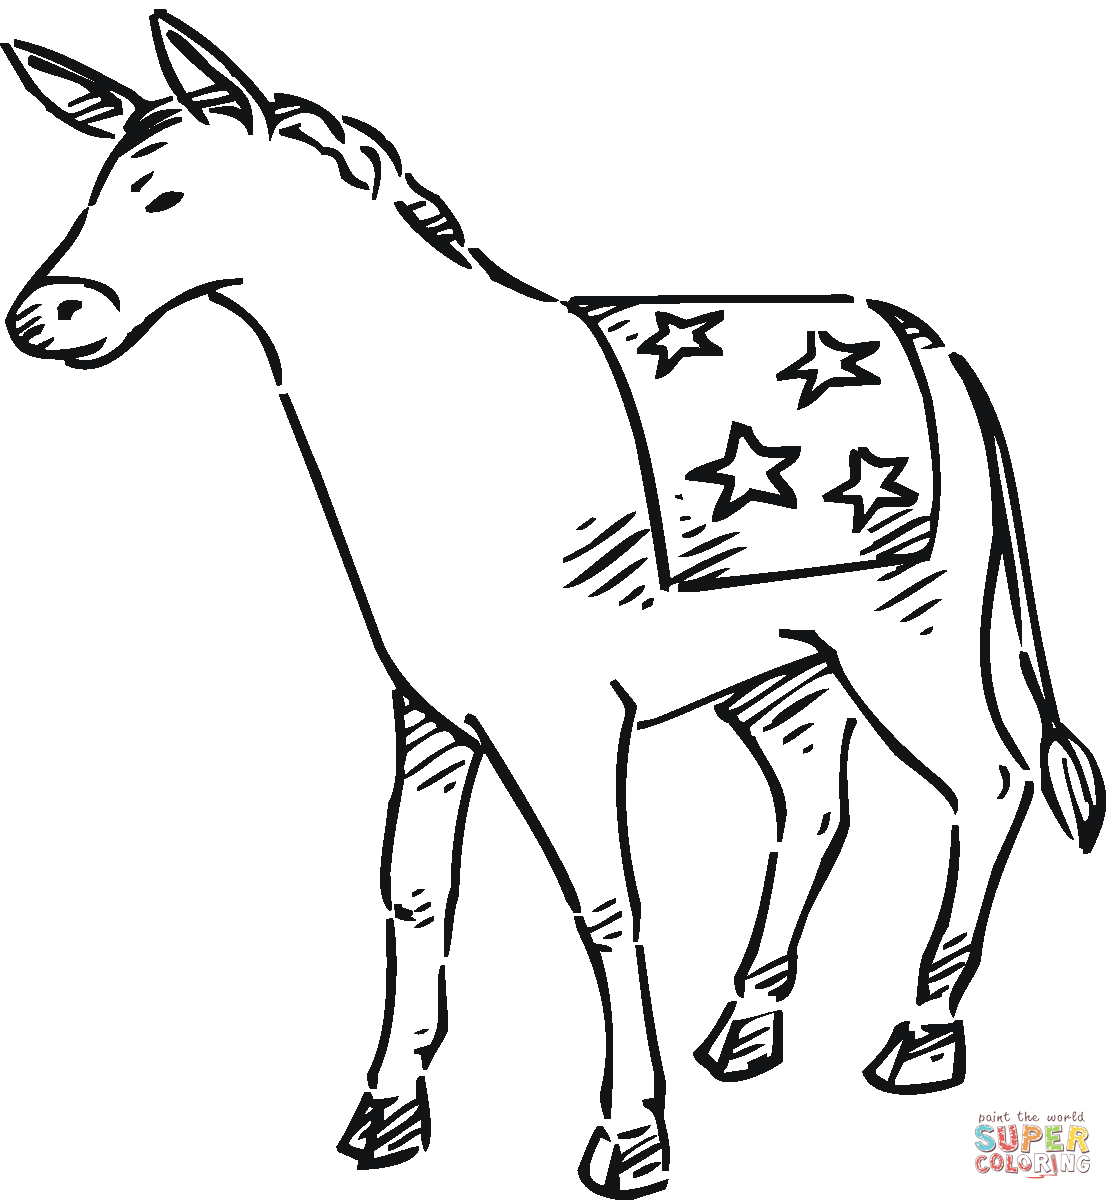 Donkey Coloring Page Democrat Donkey Coloring Page Free Printable Coloring Pages